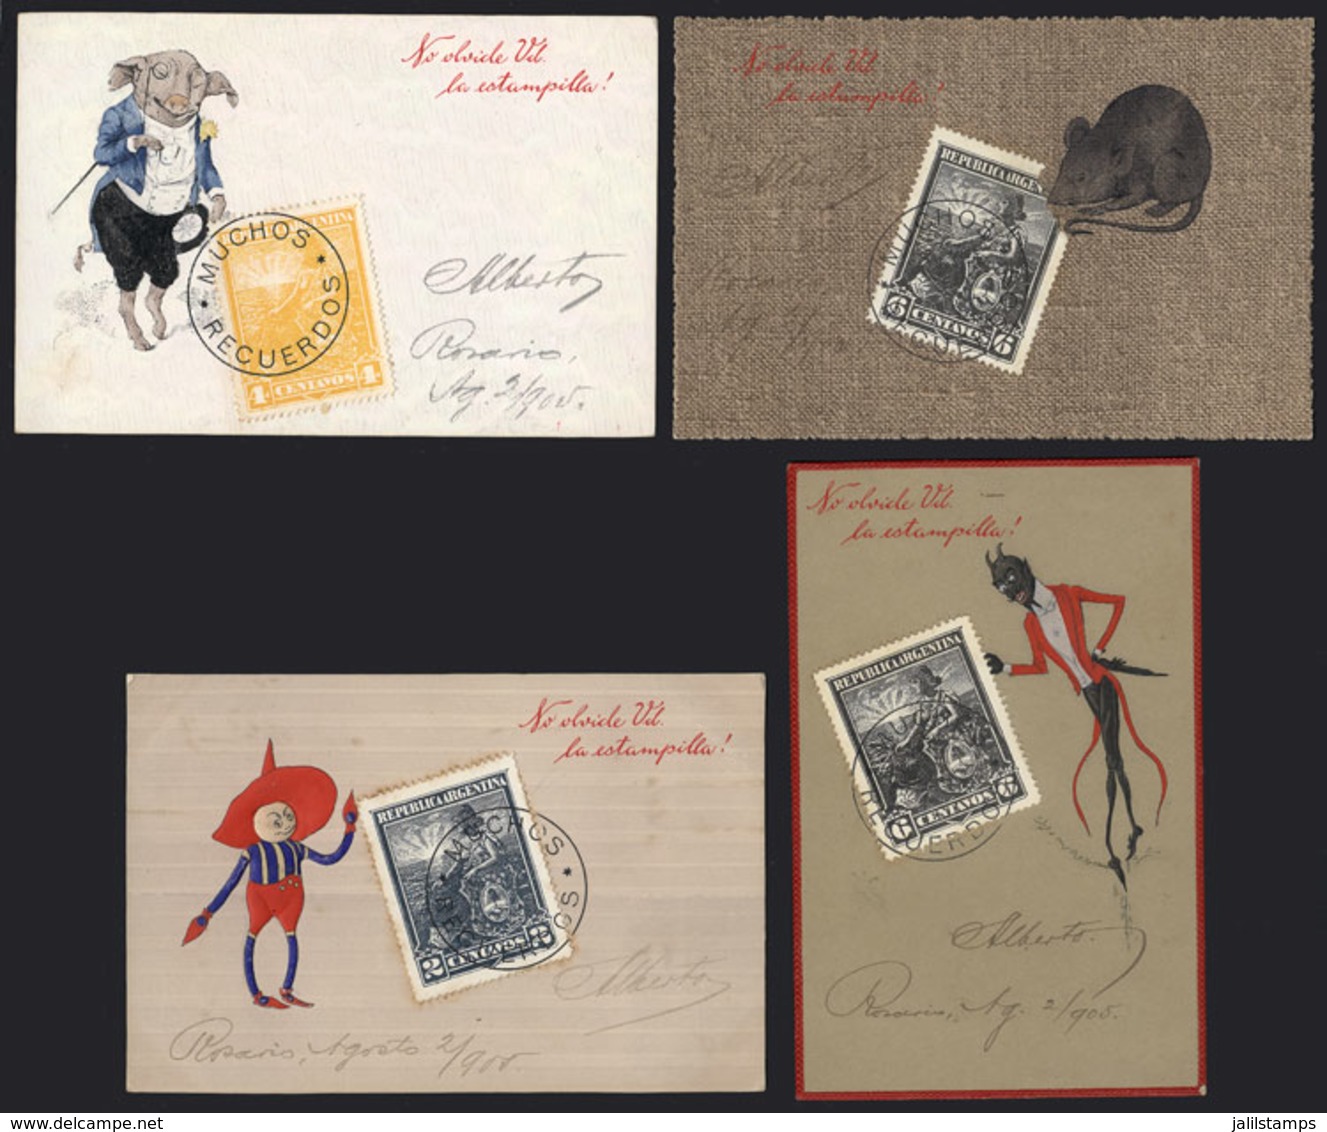 ARGENTINA: 4 Beautiful And Very Rare PCs Edited By G.B.Pedrocchi, All With Reproductions Of Stamps From The Issue Seated - Argentina